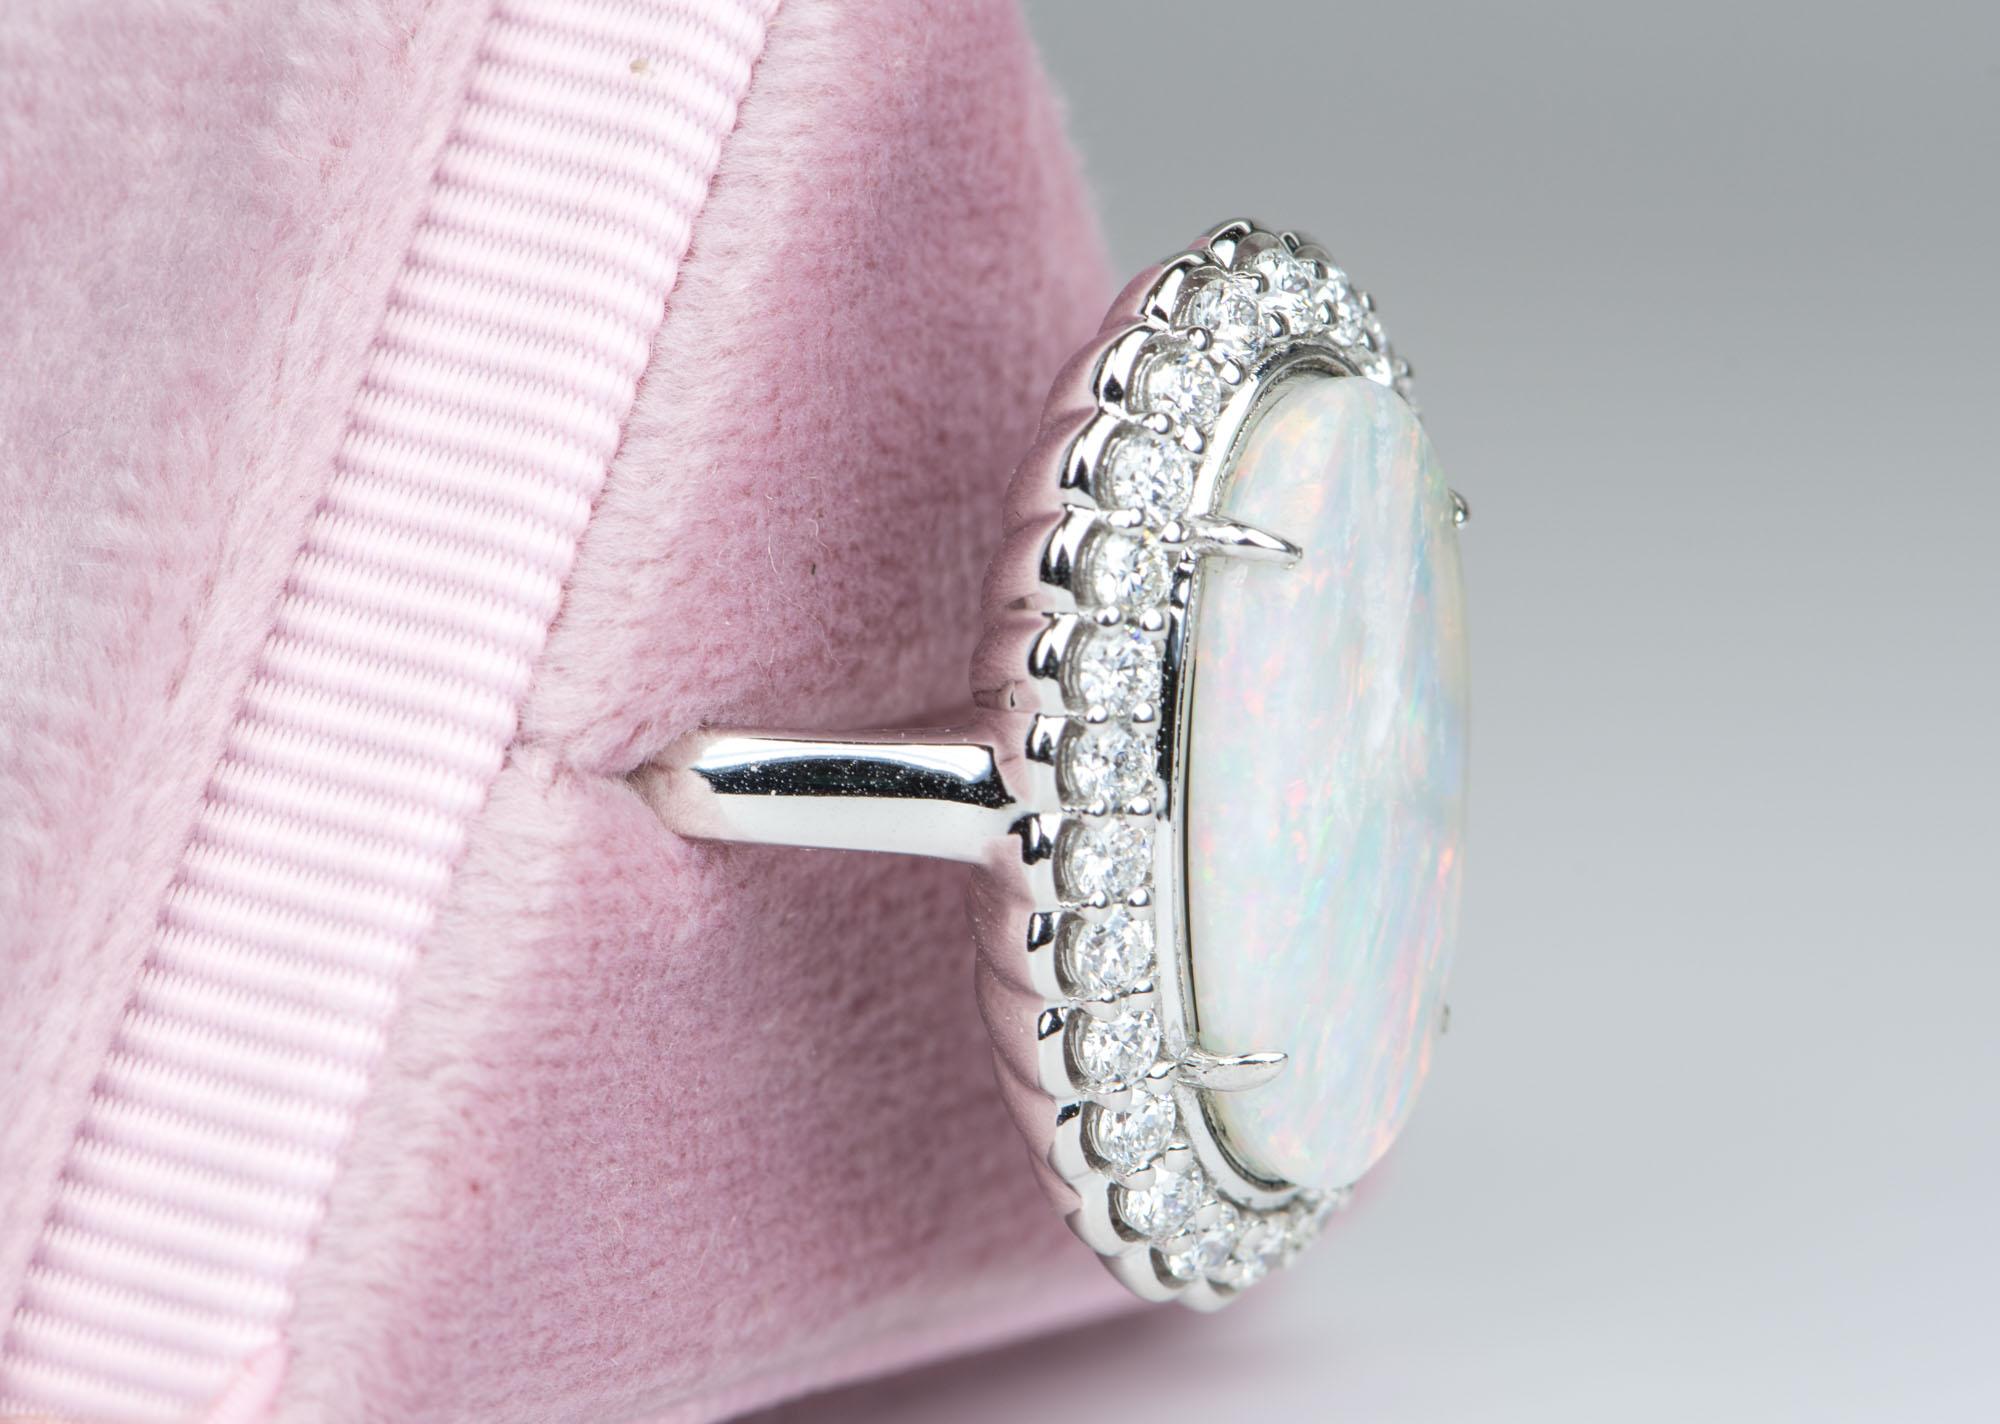 ♥  Solid 14K white gold ring set with an elongated solid Australian opal in the center, flanked by diamonds in a scalloped halo design
 ♥ This Australian opal is full of rainbow flashes like fire red, orange, yellow, blue and green. 
 ♥  The overall